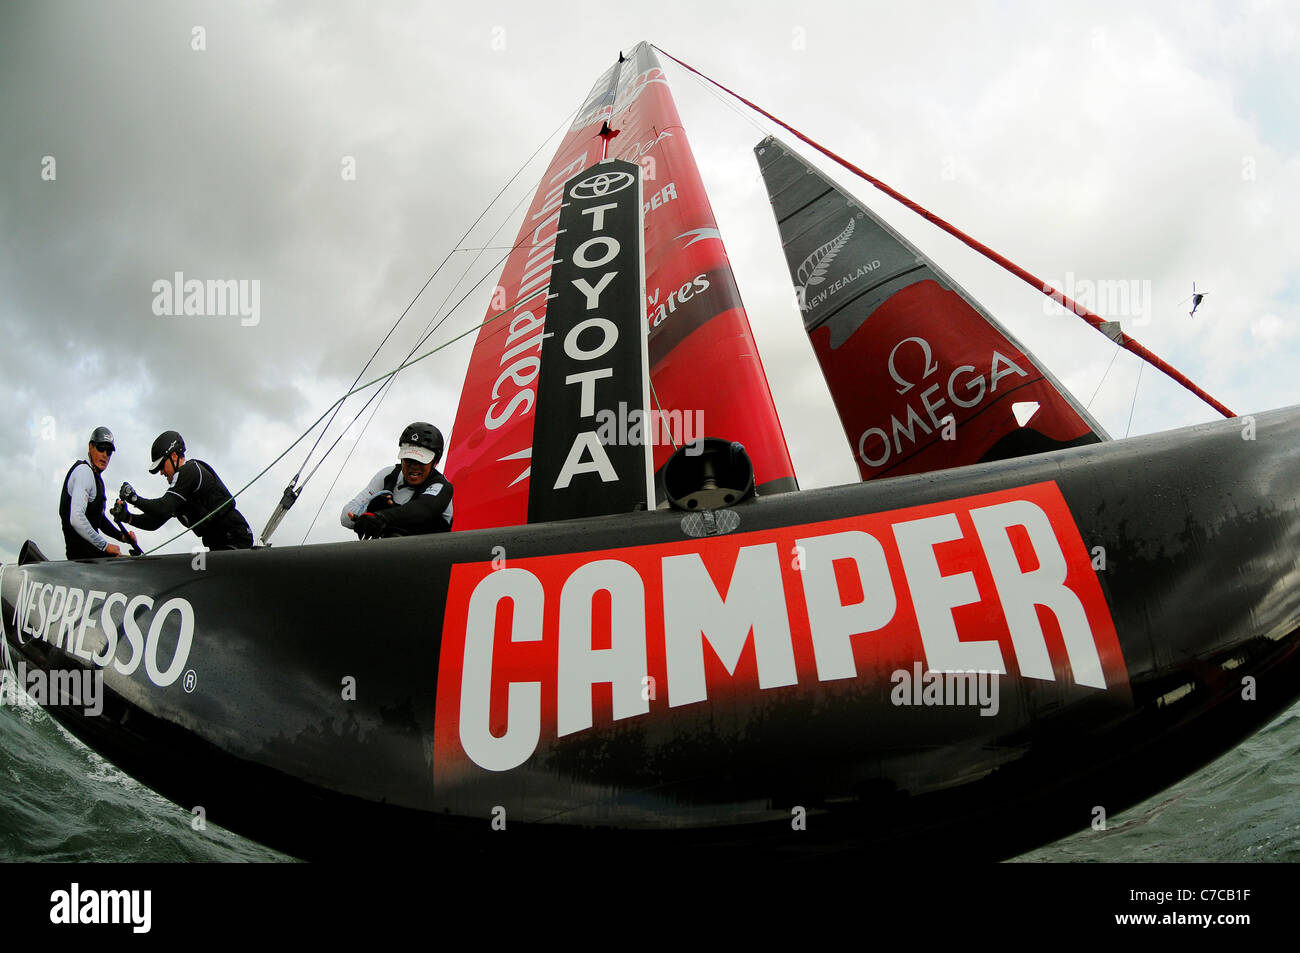 America's Cup World Series sailing event in Plymouth. Stock Photo